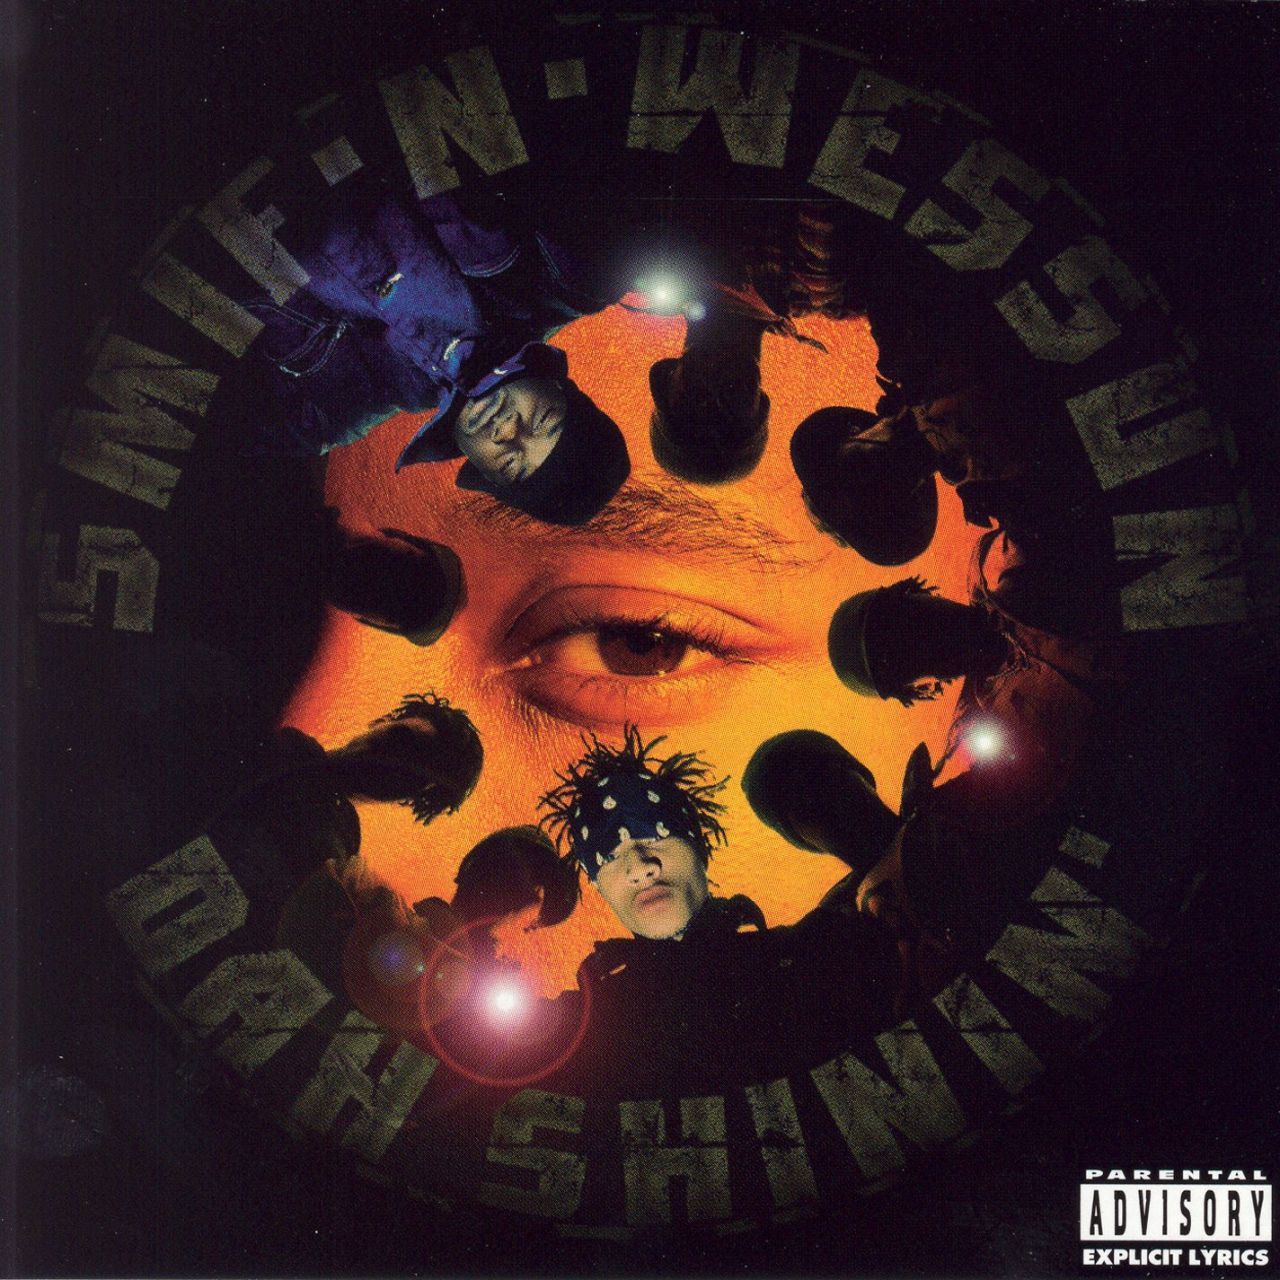 BACK IN THE DAY |1/10/95| Smif-N-Wessun release their debut album, Dah Shinin&rsquo;,